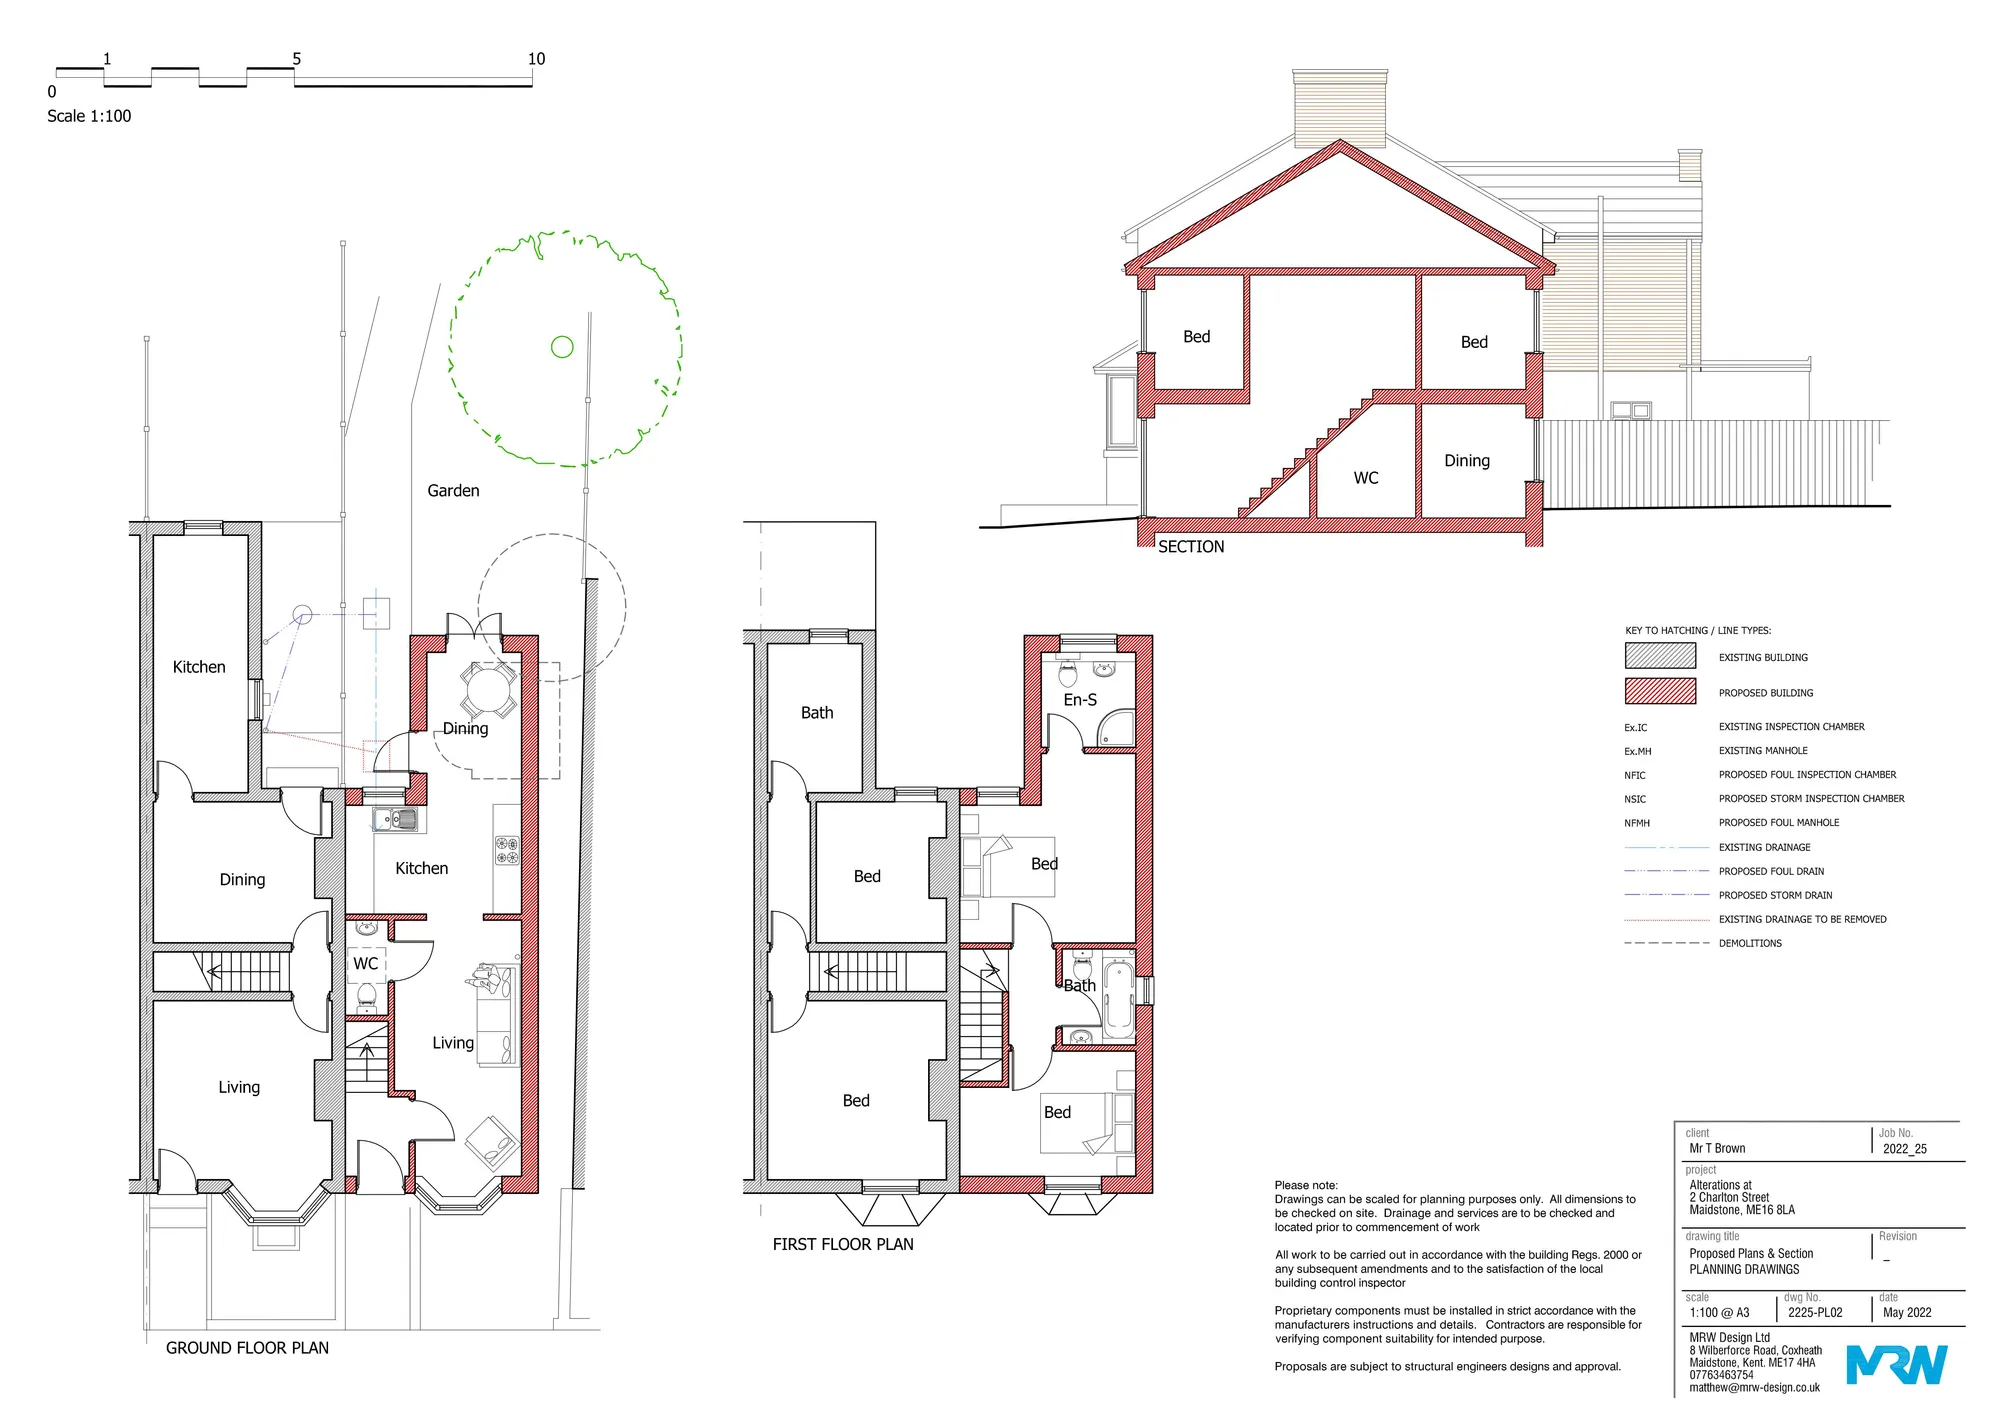 2 bed land for sale in Charlton Street, Maidstone - Property floorplan